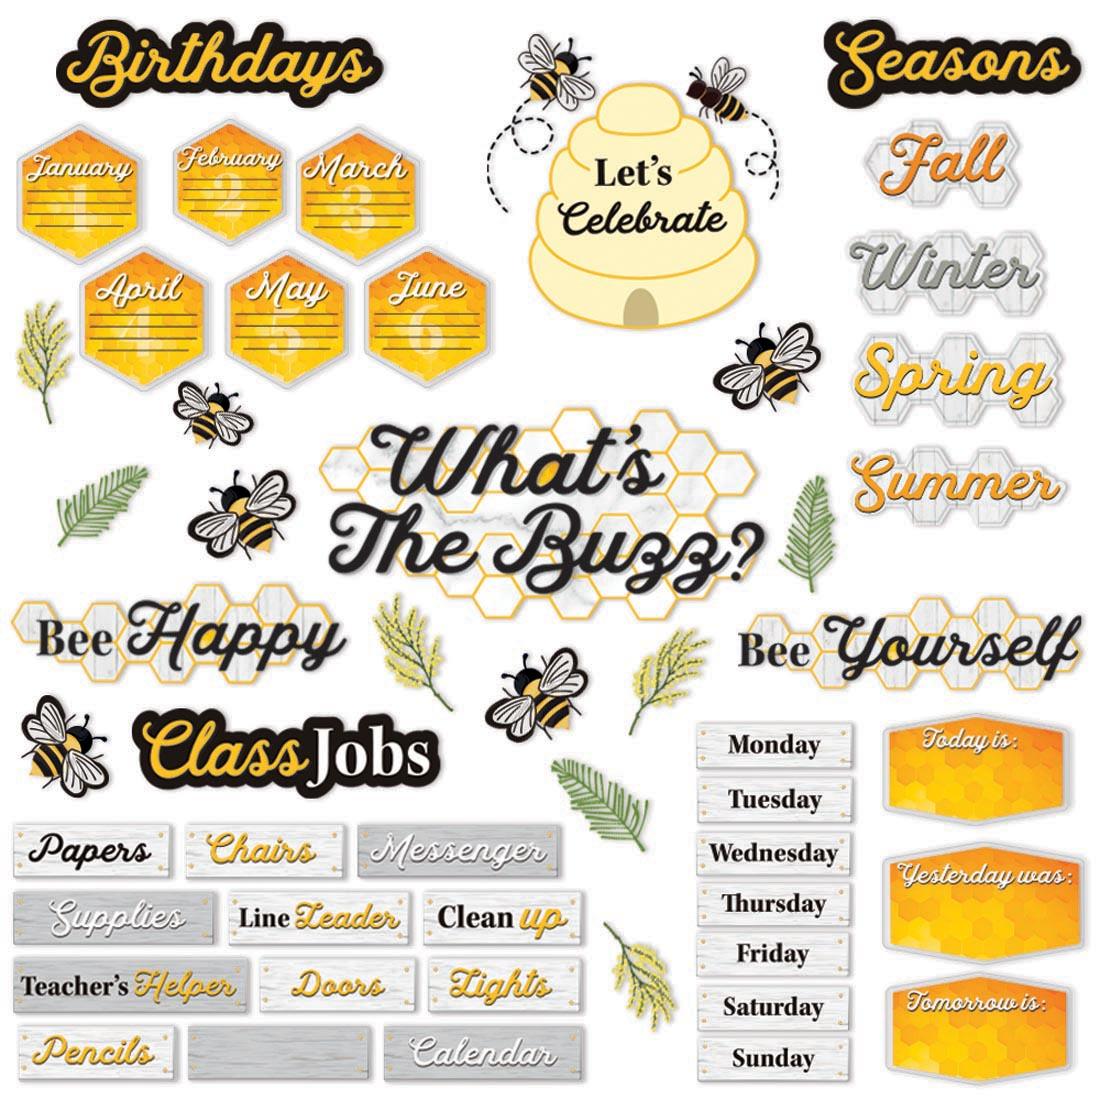 Classroom Organization Bulletin Board Set from The Hive collection by Eureka